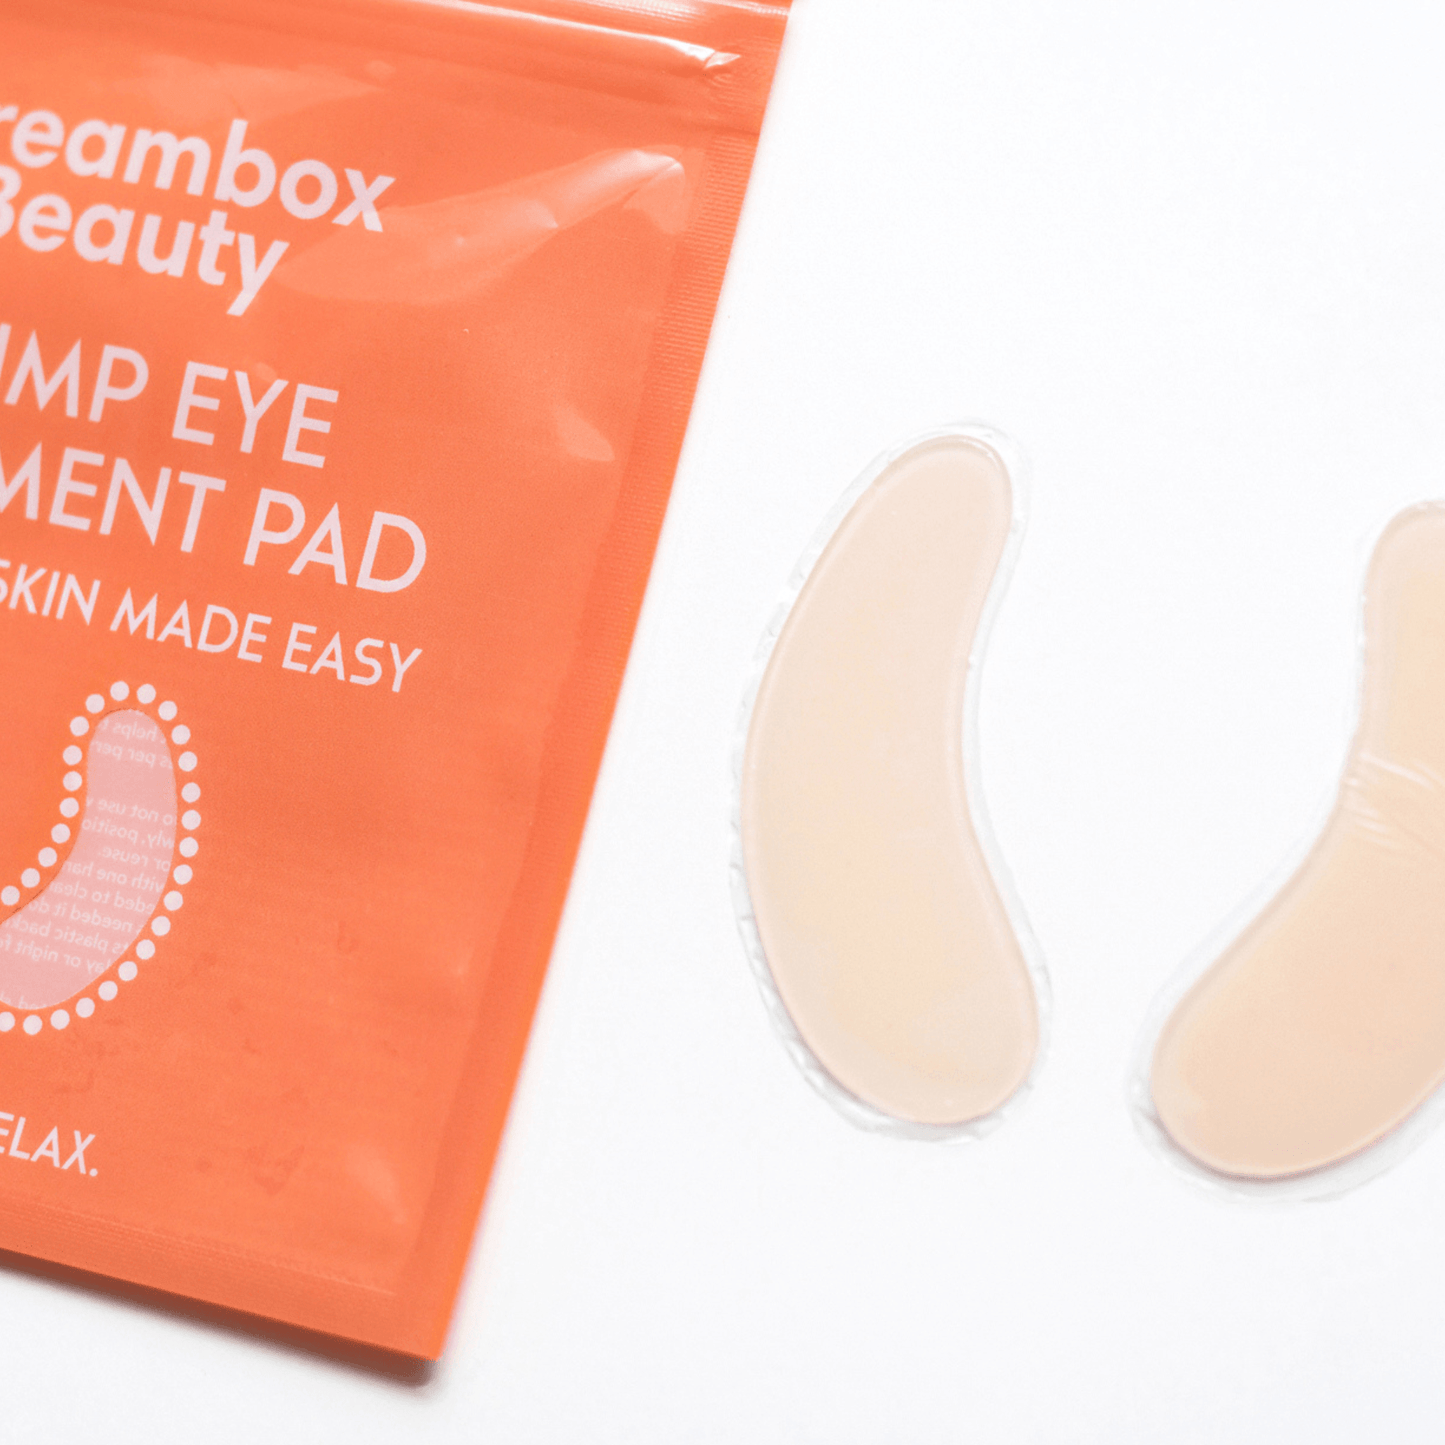 Skin Plumping Eye Wrinkle Reducer [Reusable Silicone Pad] - Dreambox Beauty